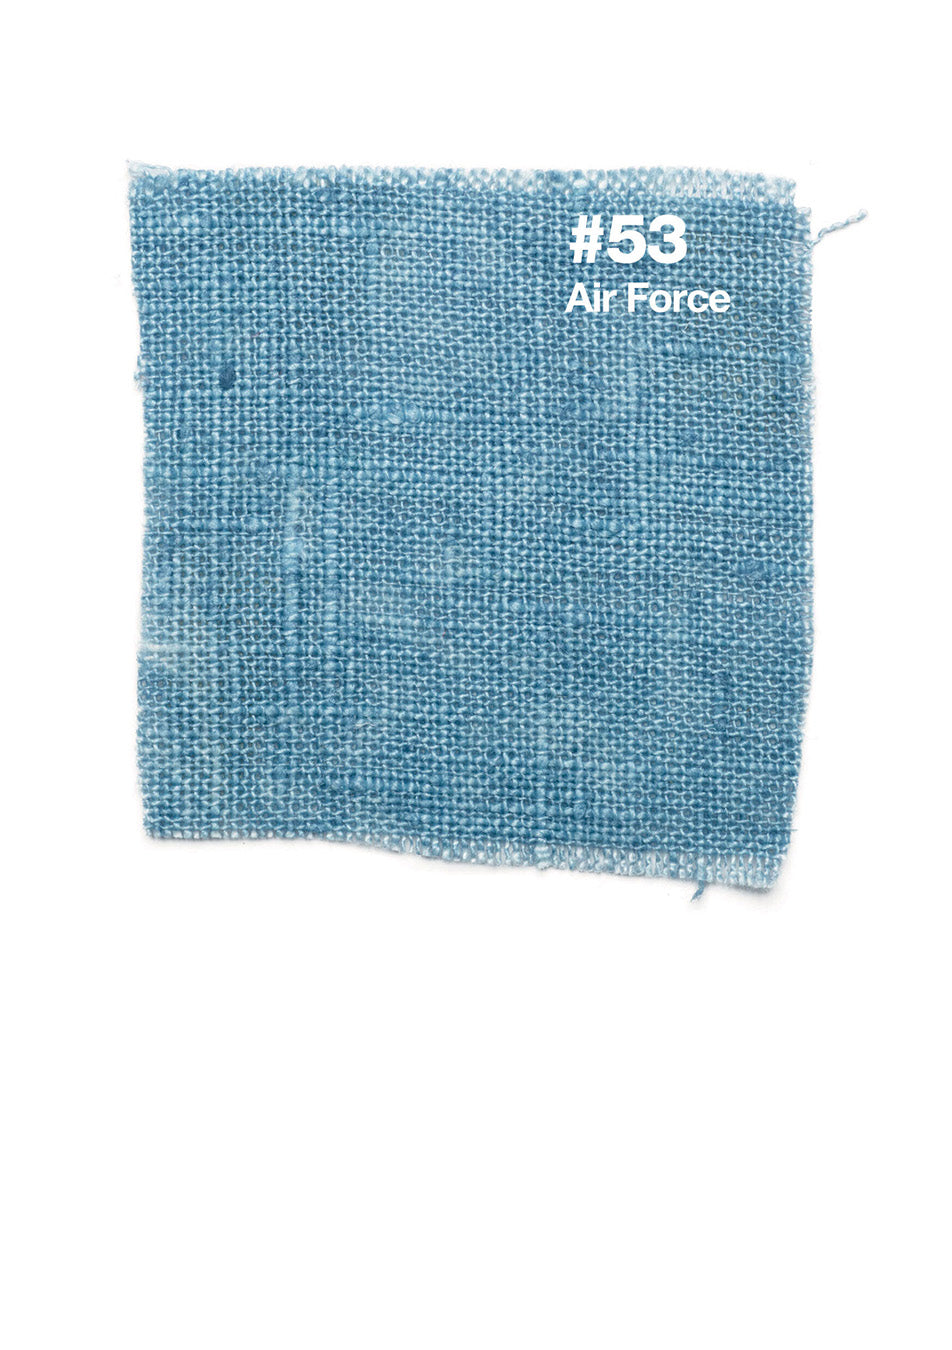 Table linen n.53 Air Force